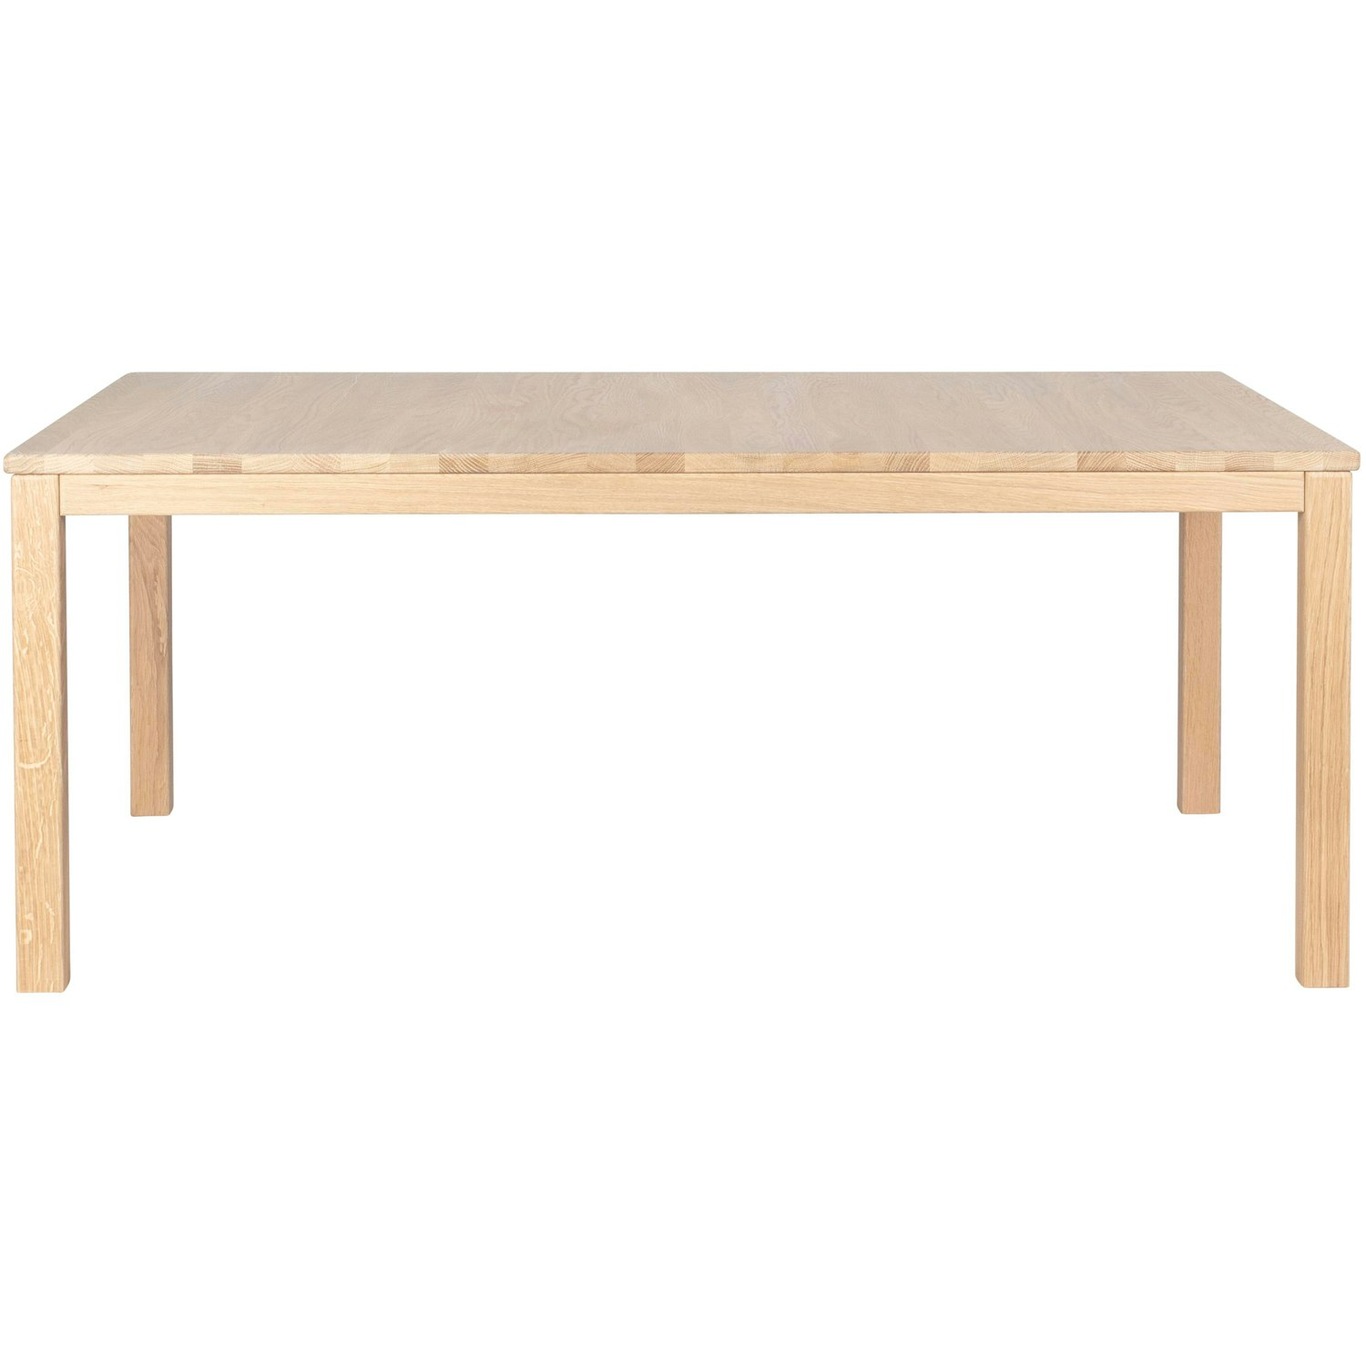 Klassik 6B Coffee Table With Drawer, 85x130 cm, White Oiled Oak